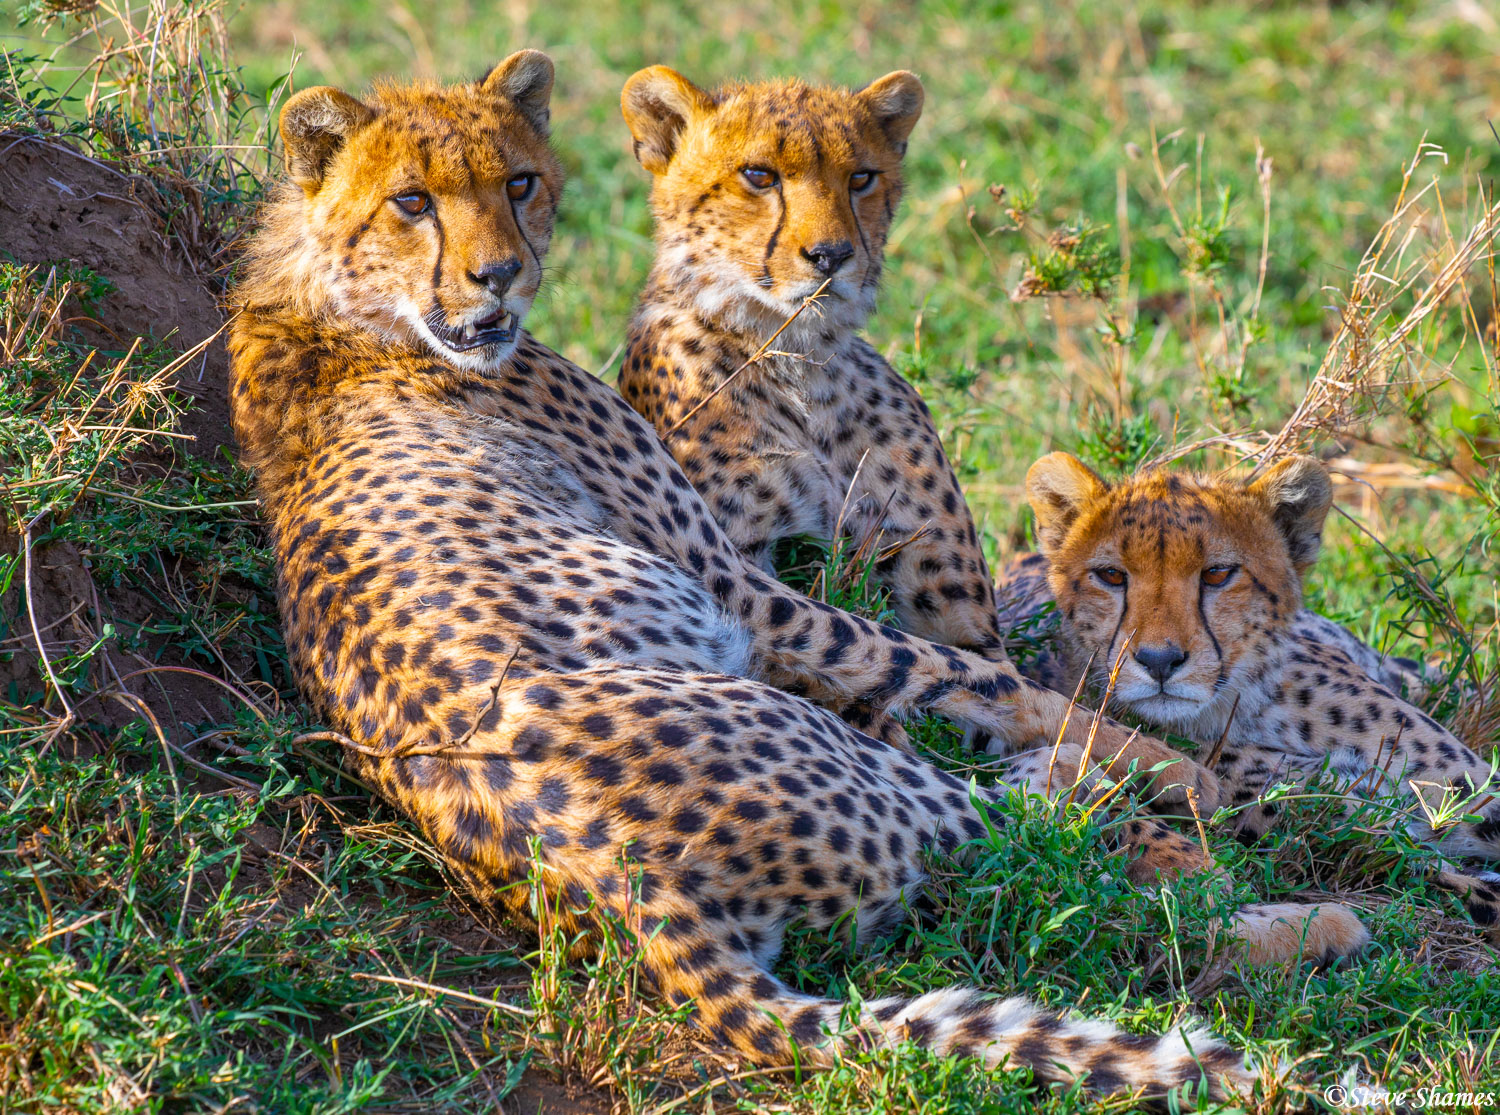 Three large cheetah cubs relaxing, but always on the lookout.